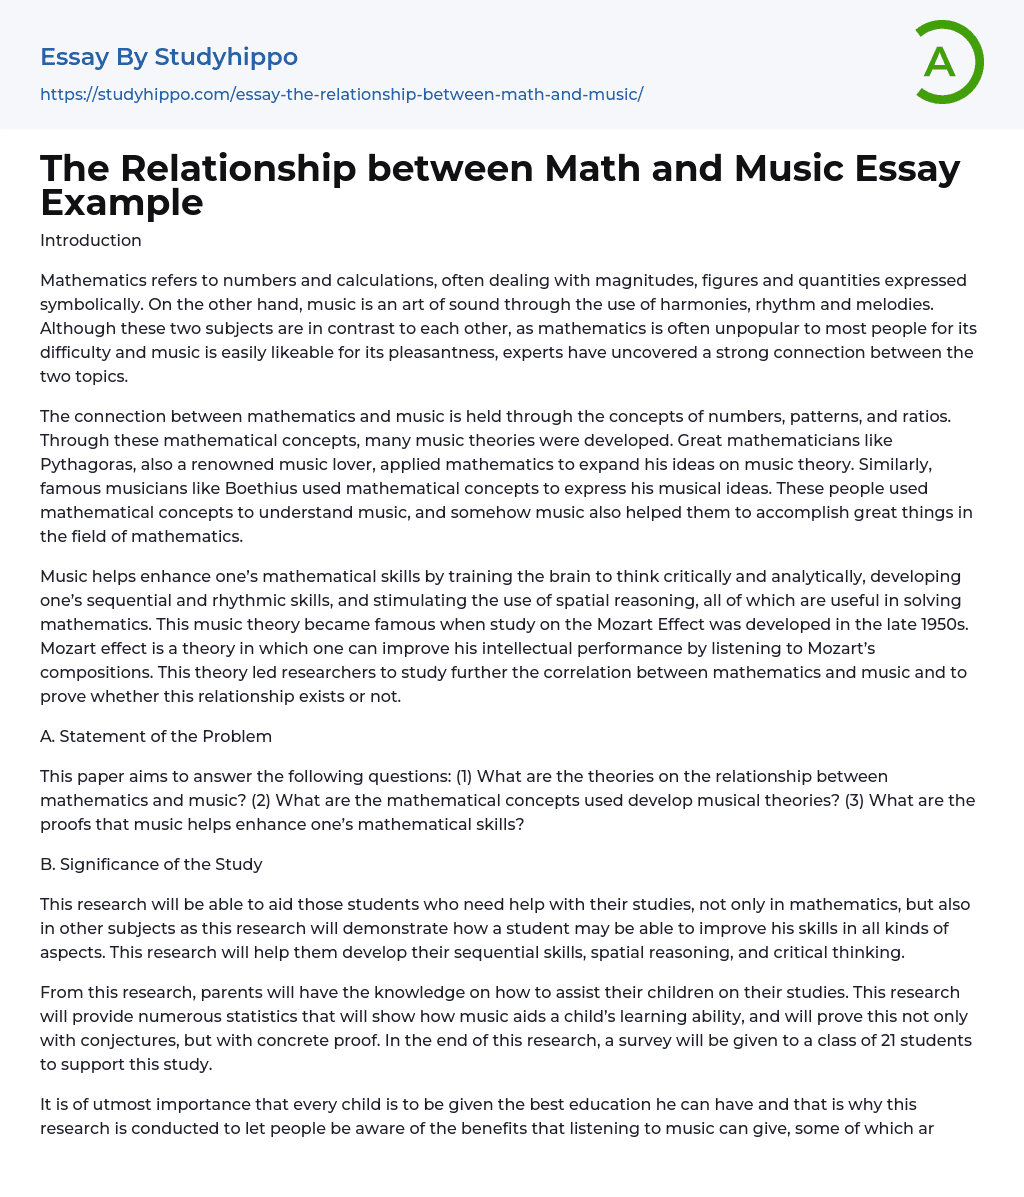 The Relationship between Math and Music Essay Example